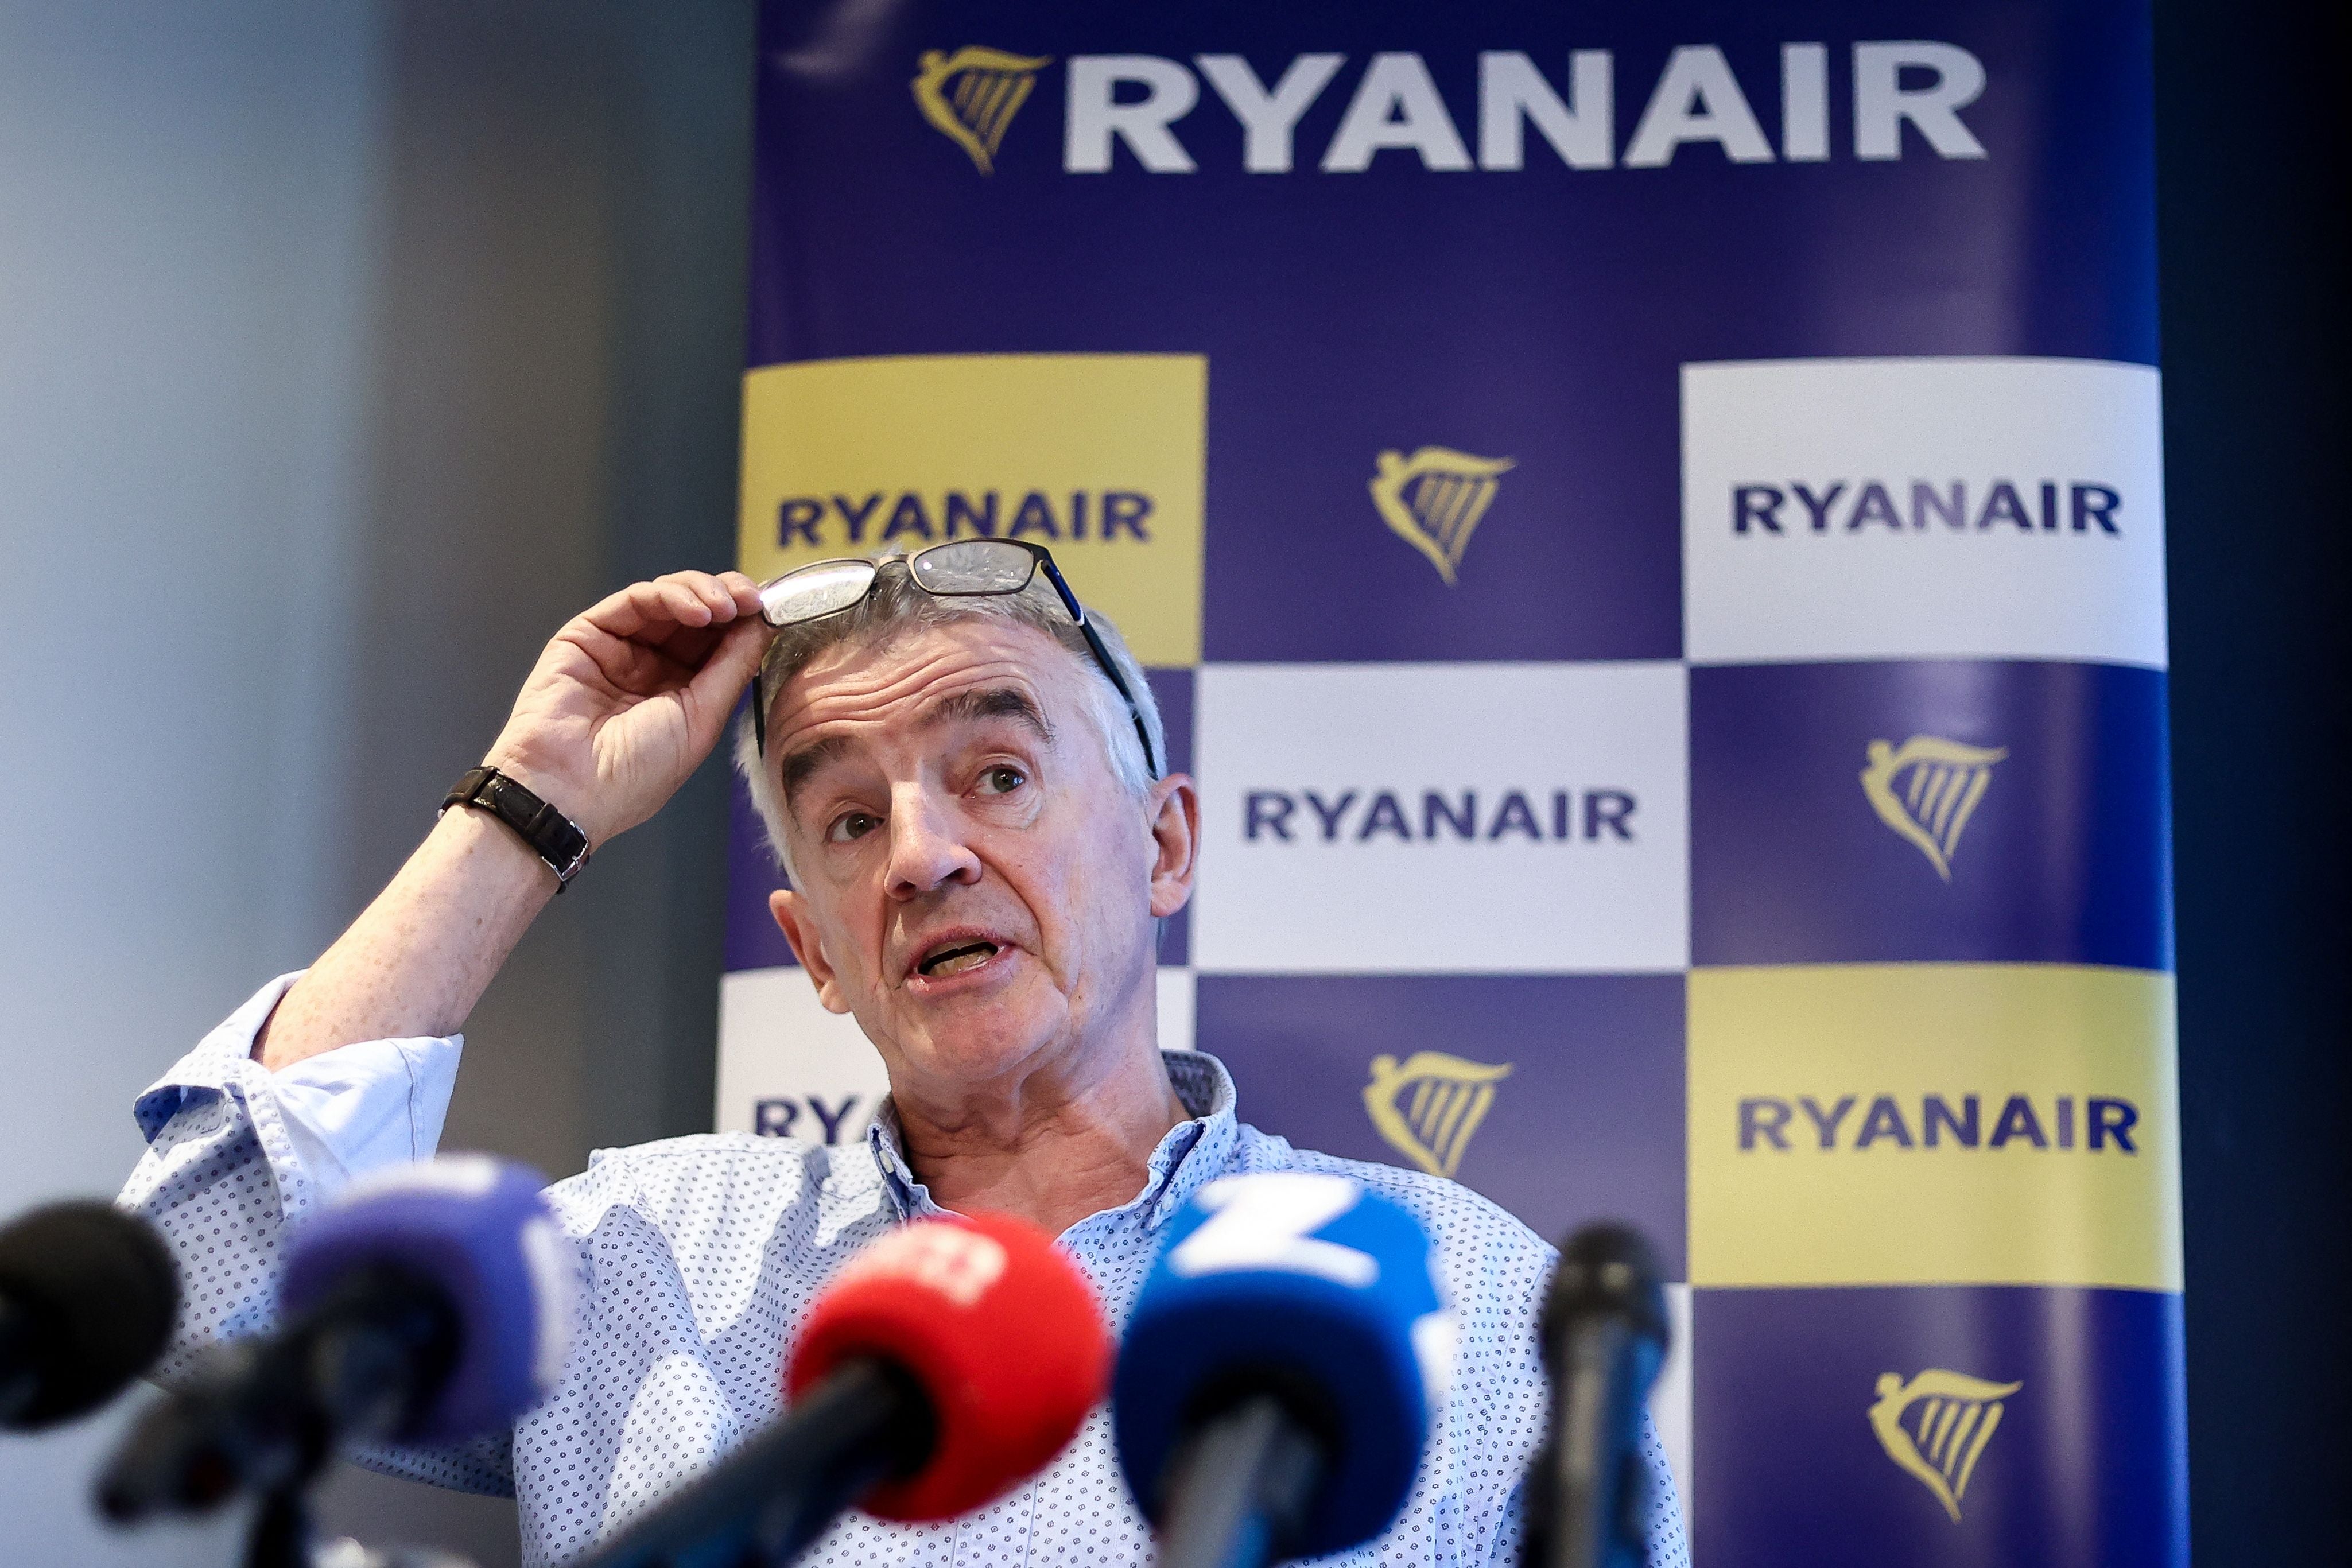 Michael O’Leary promises new routes and thousands of jobs for locals